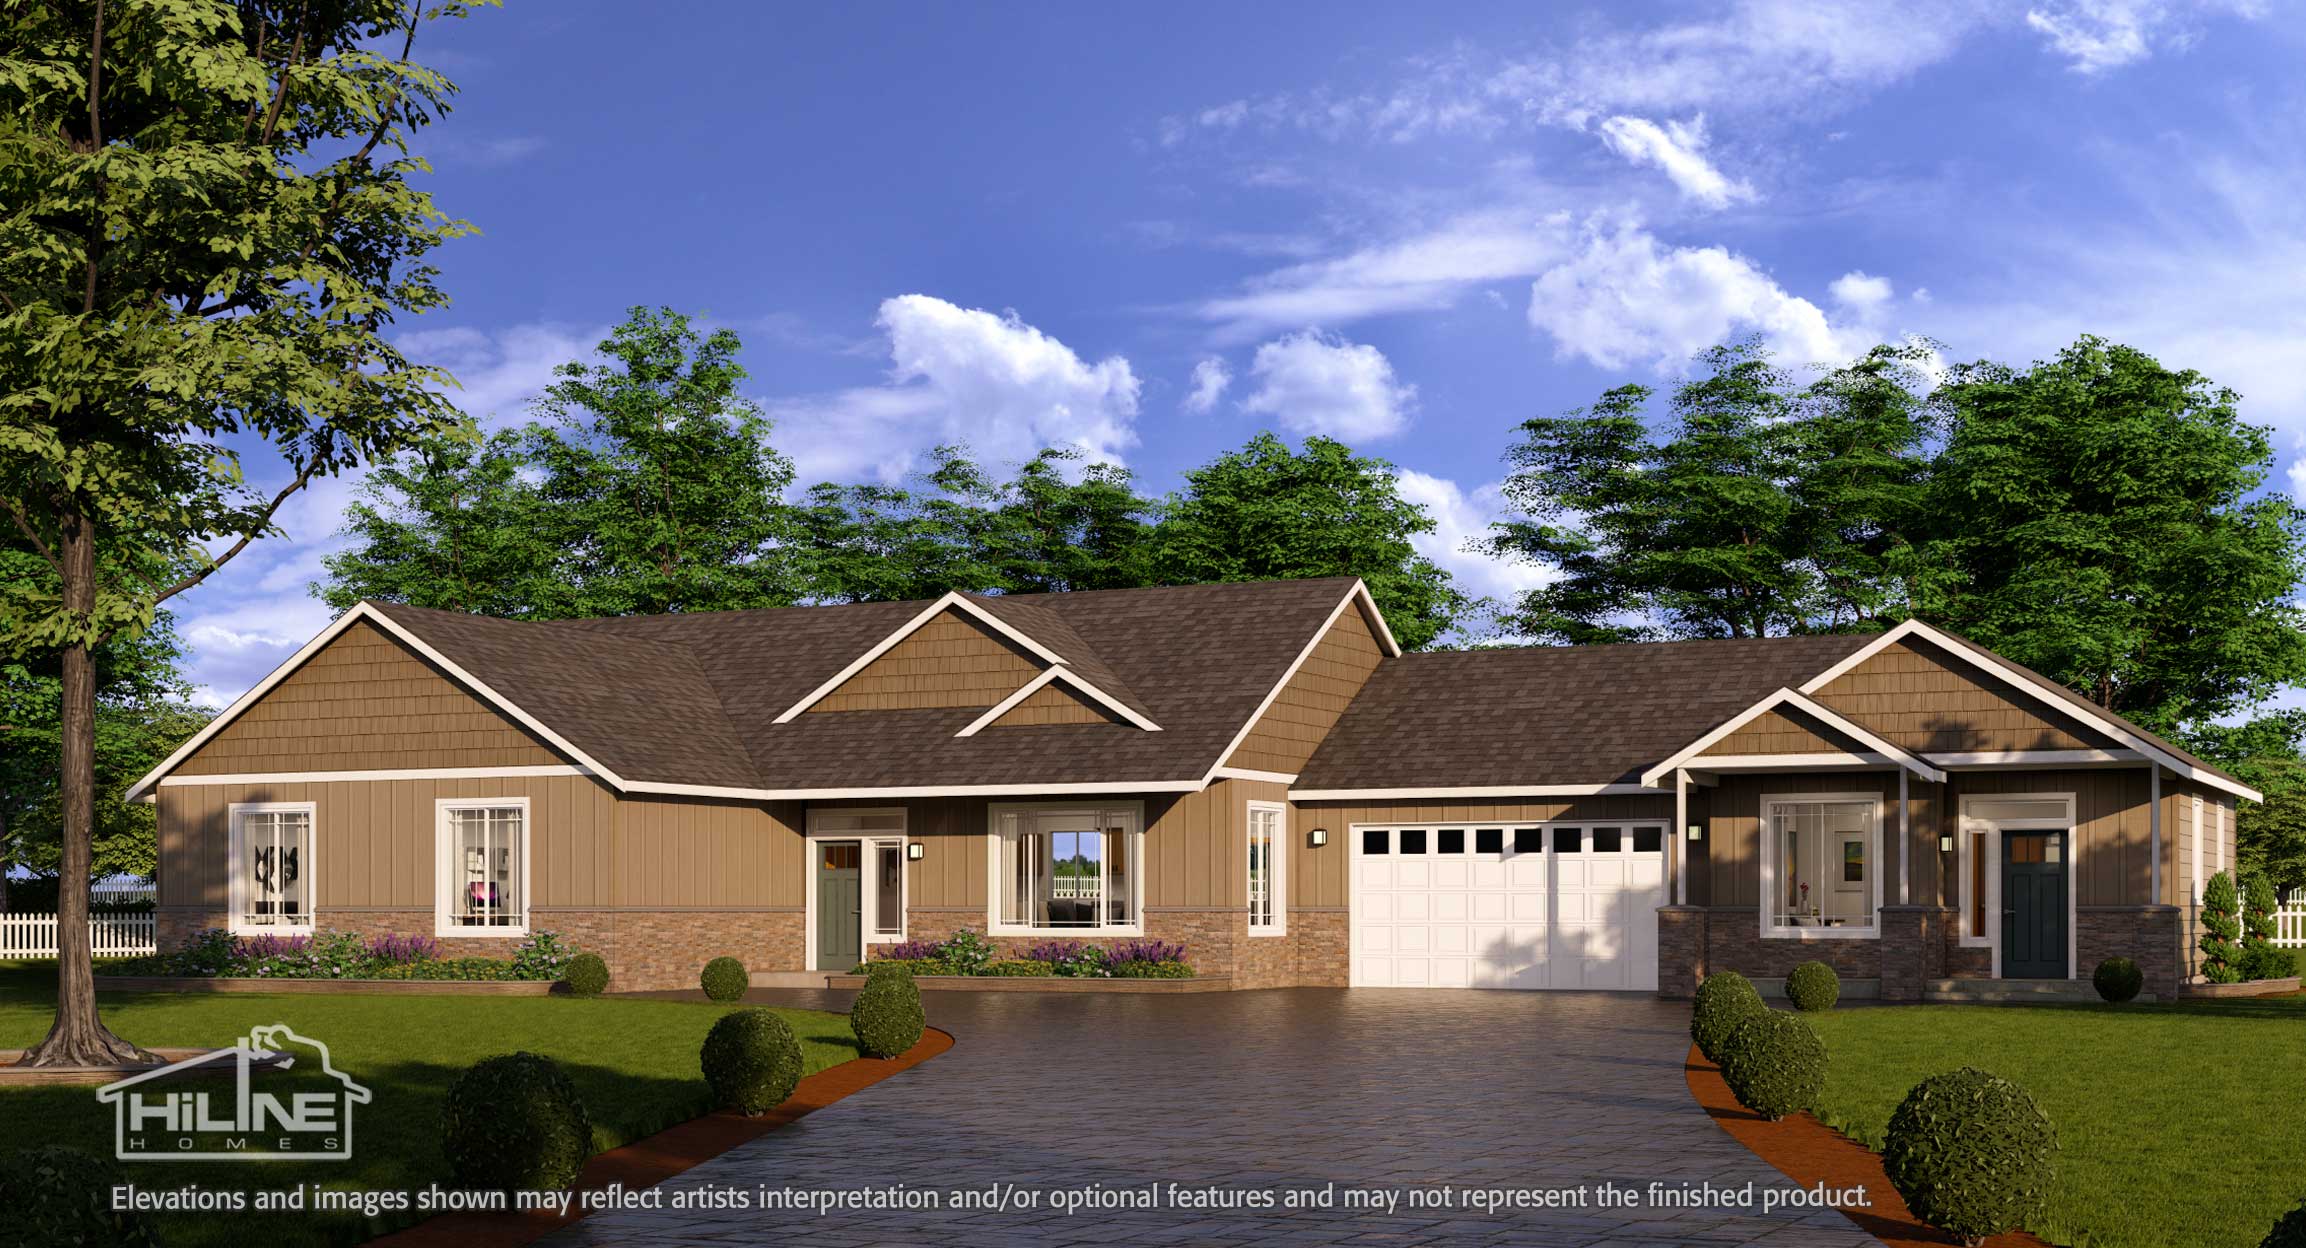 Image of Home Plan 2112 Enhanced Rendering with 500A ADU Attached.